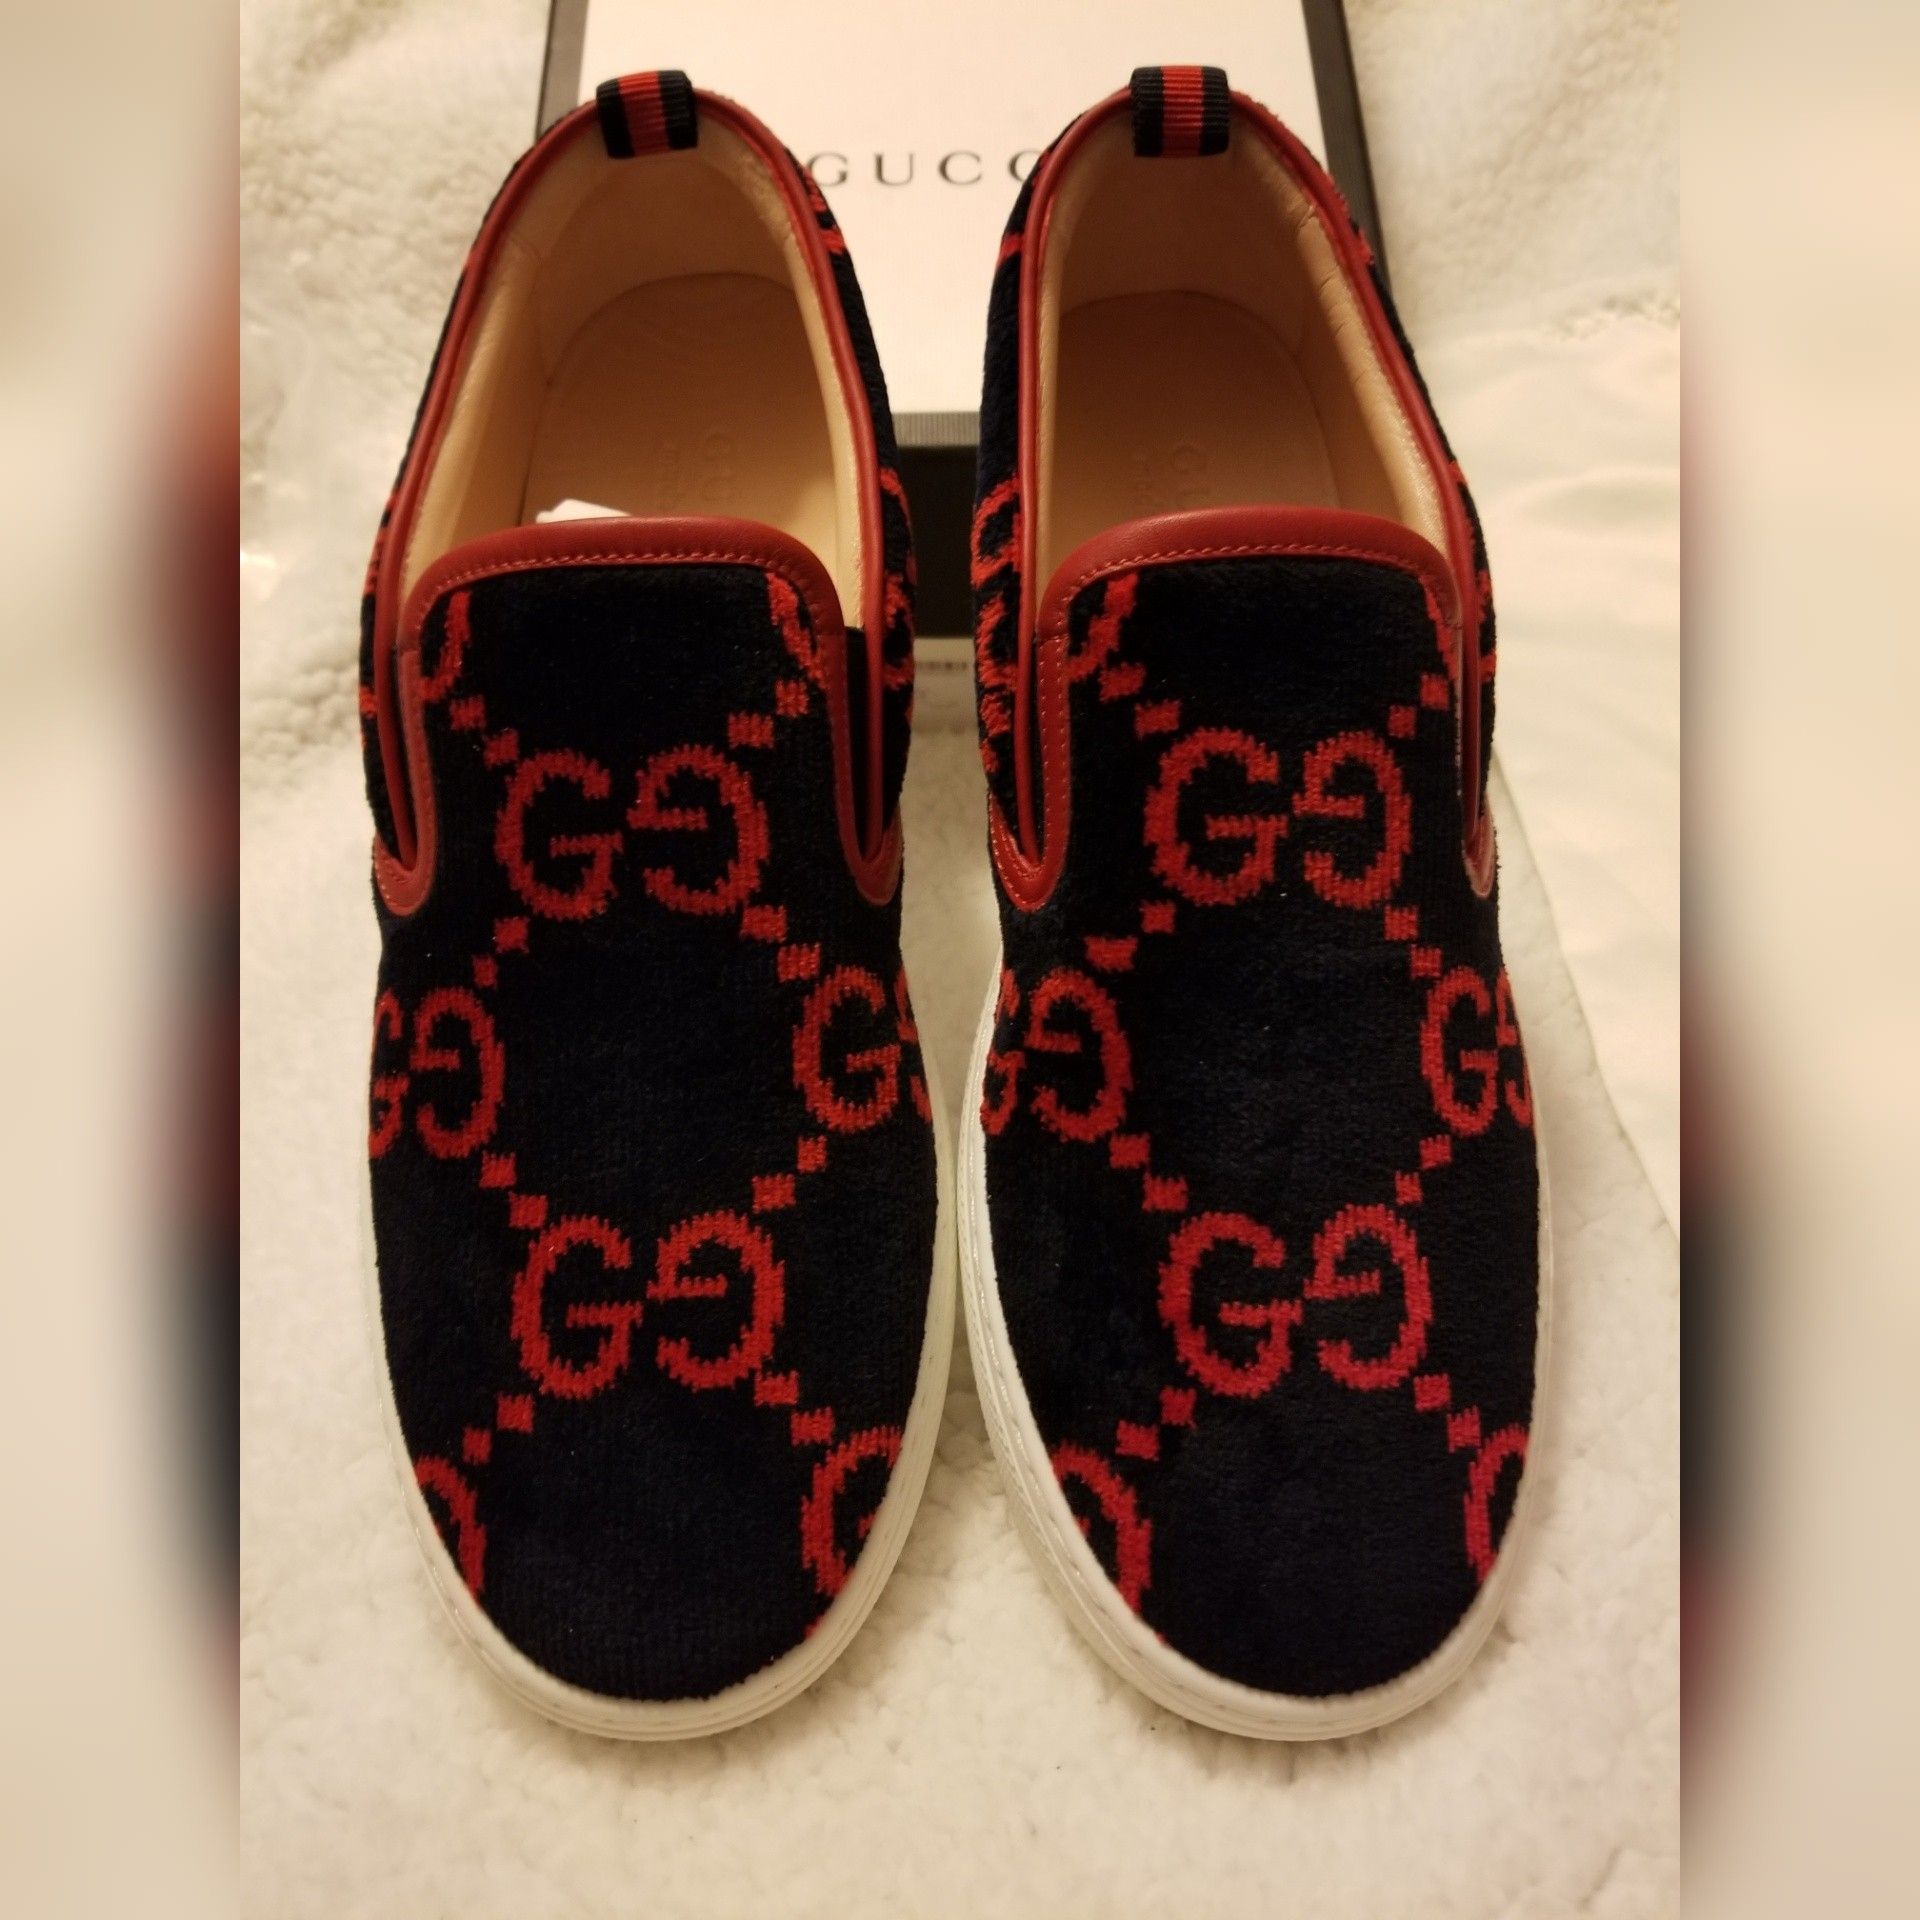 Men's Gucci sneakers (size 7)